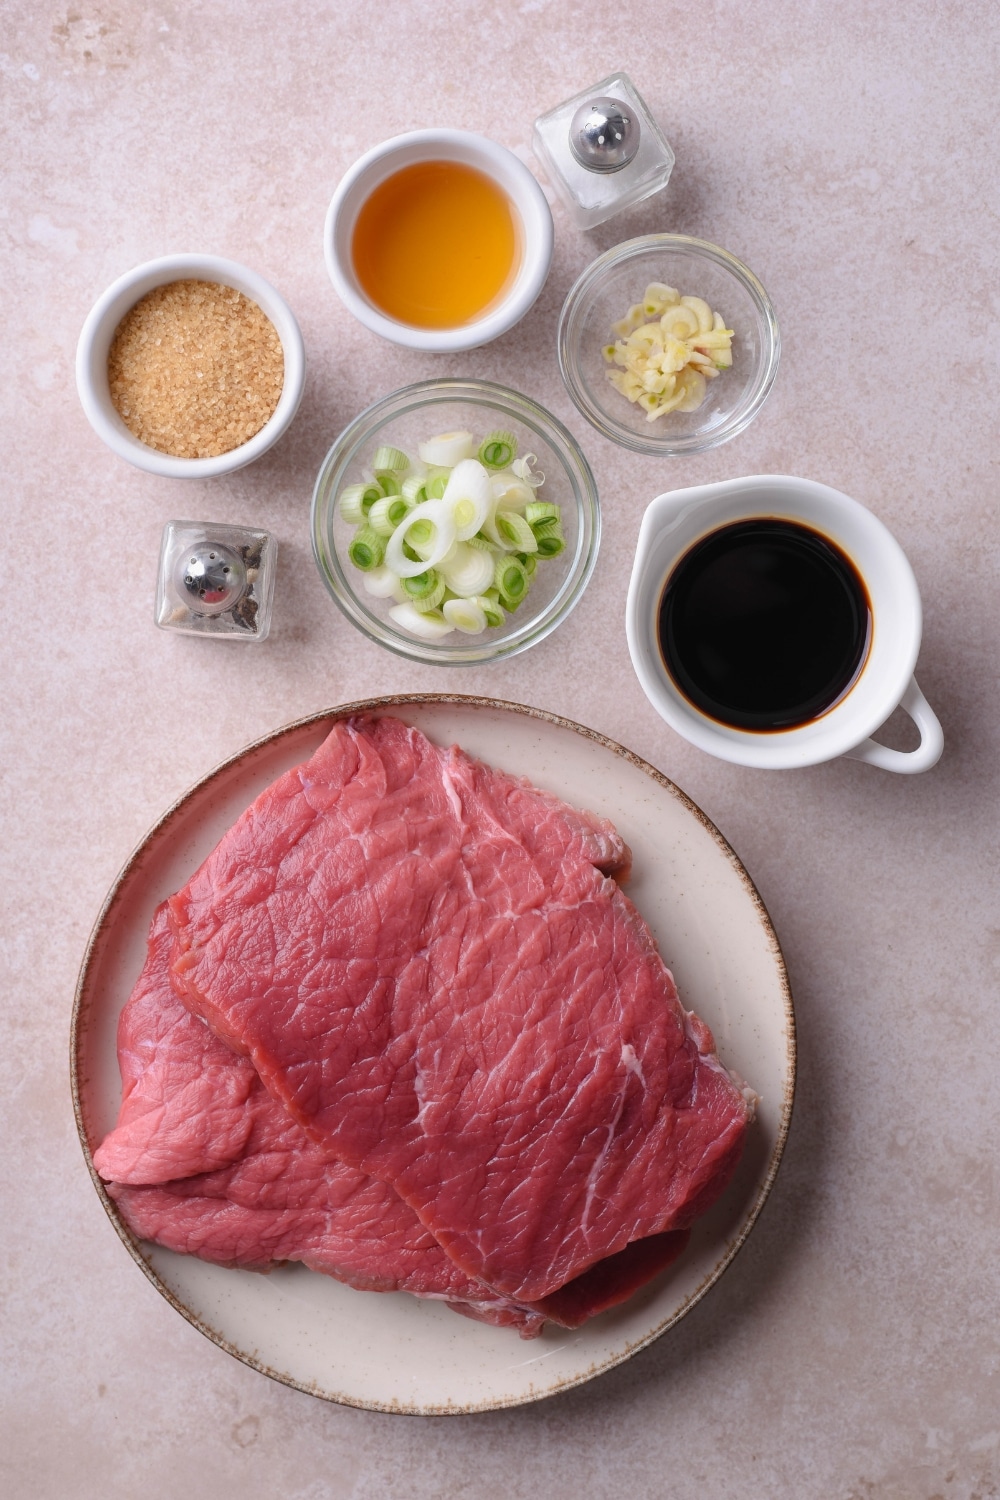 Raw sirloin tip steak on a plate, small bowls of soy sauce, rice vinegar, brown sugar, sliced garlic gloves, and sliced green onion, and salt and pepper shakers.